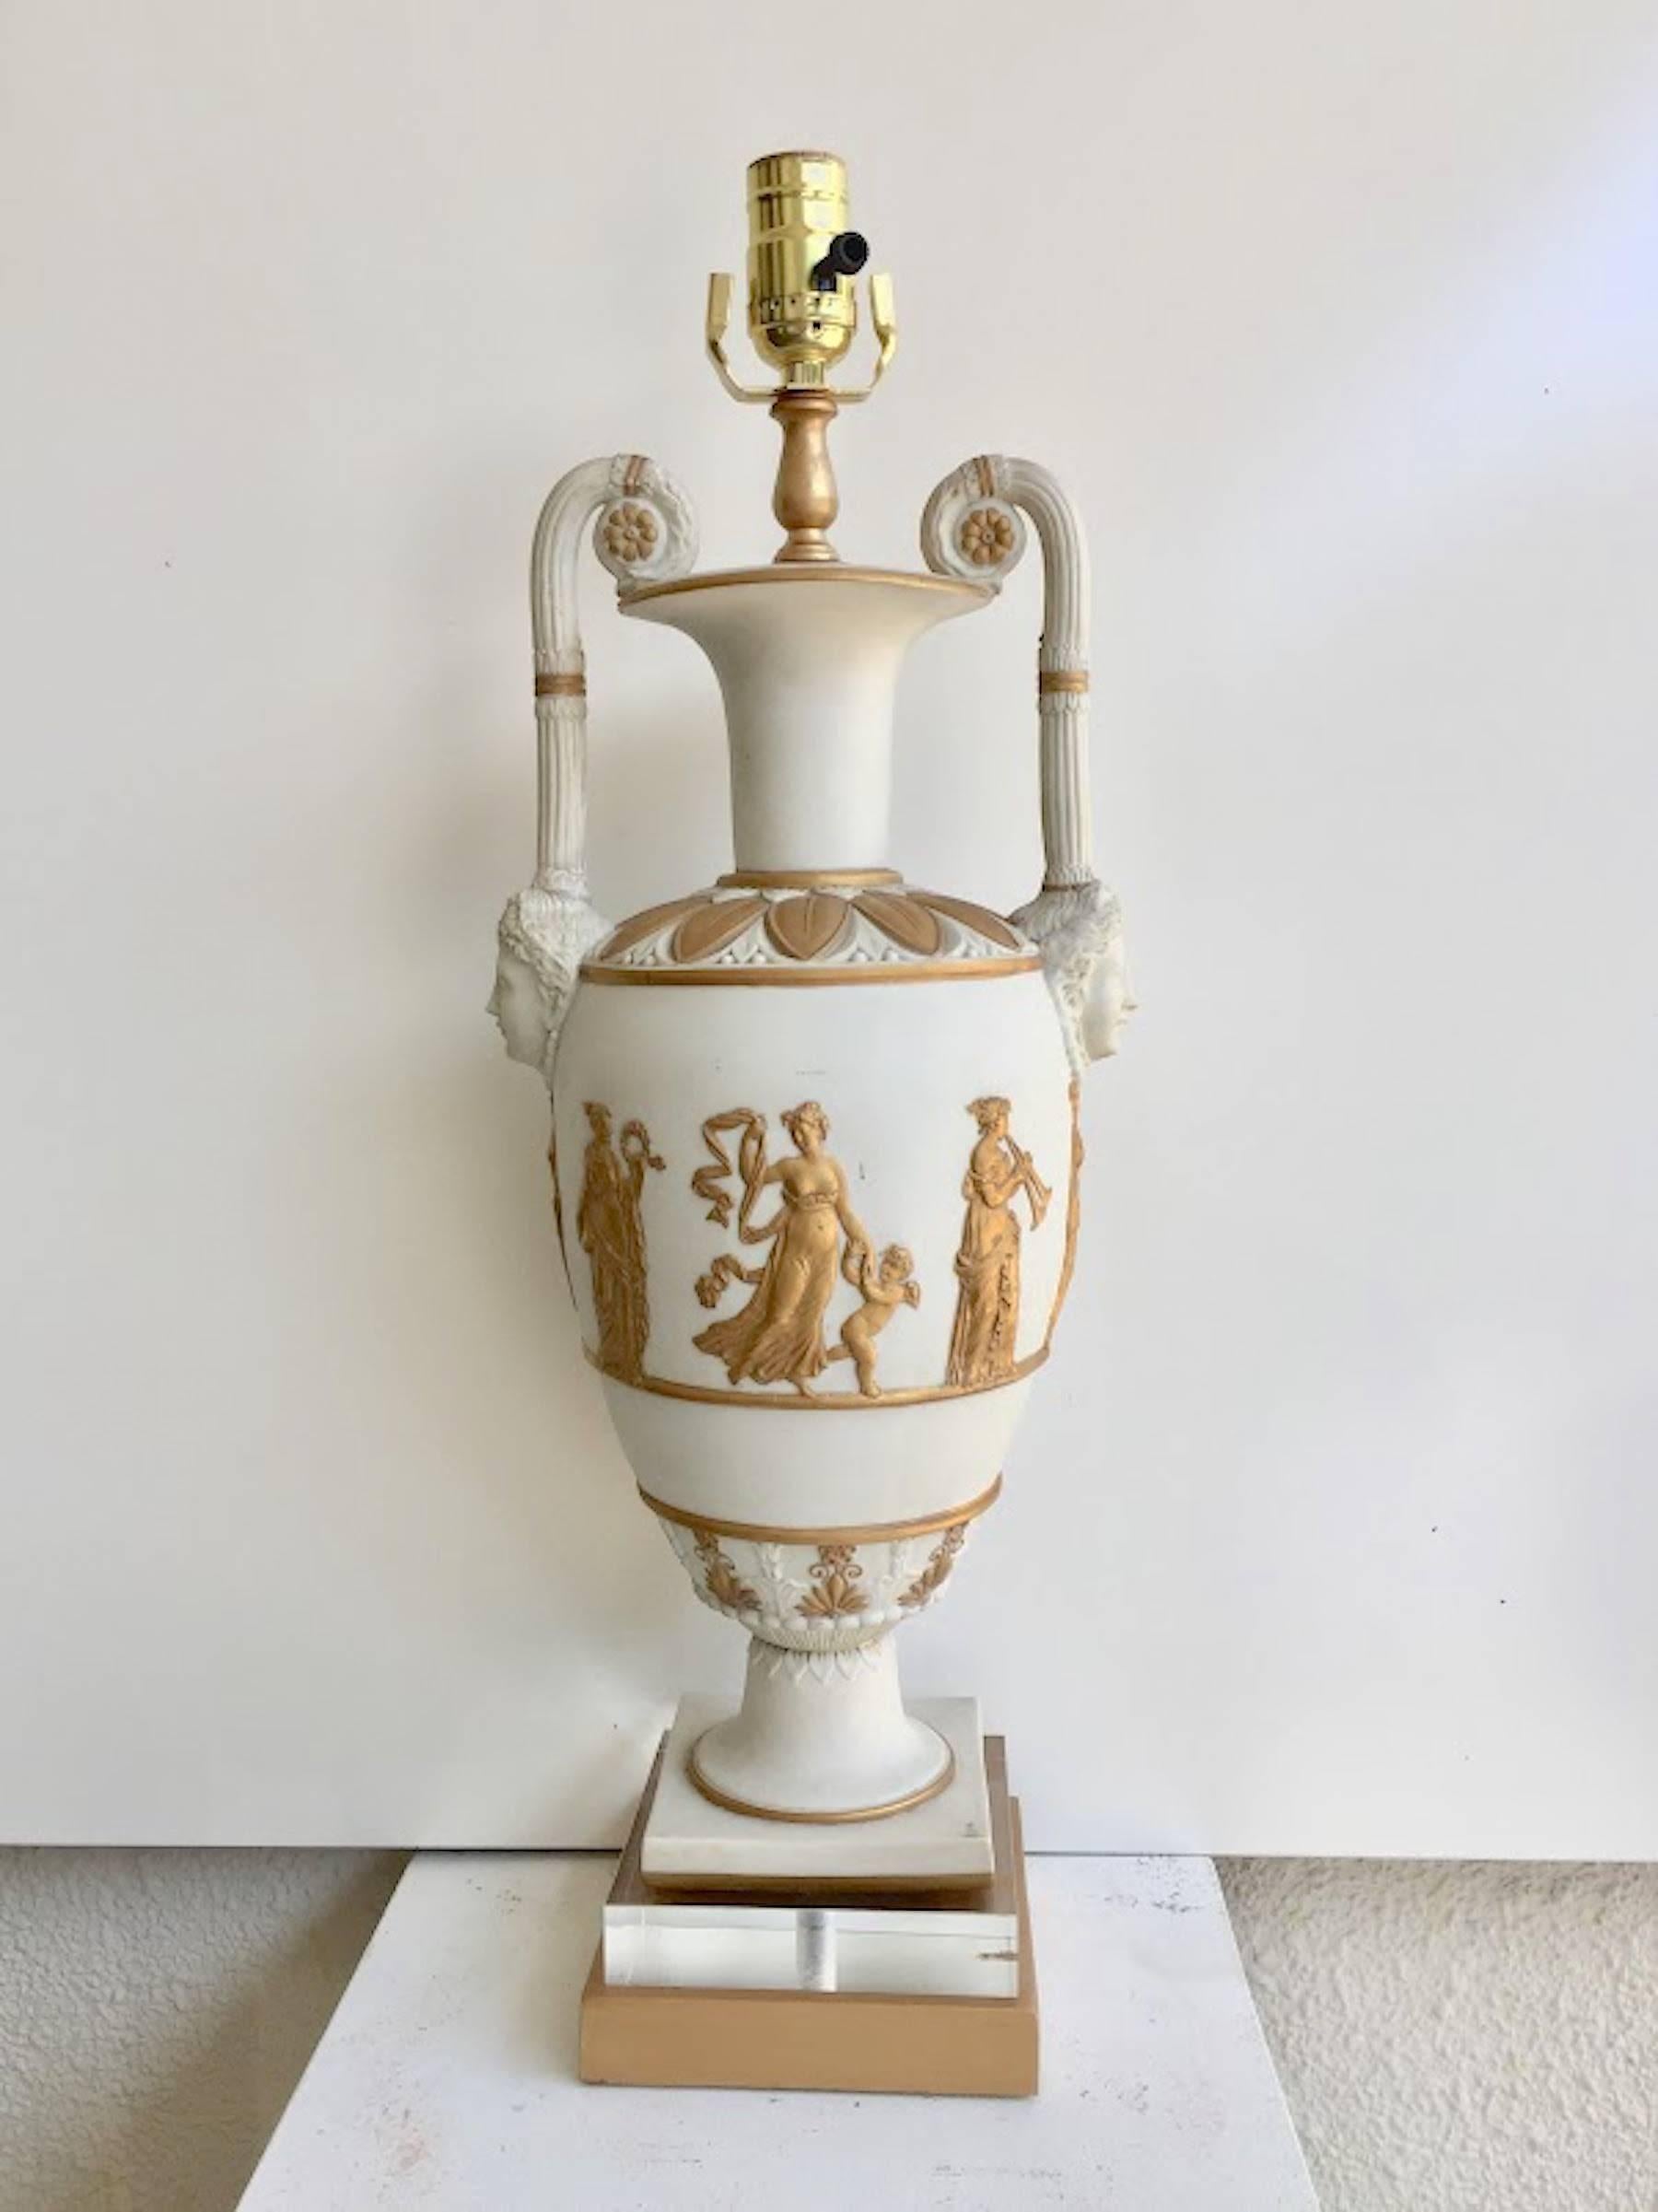 Pair of neoclassic Continental white and gilt basalt vases, now as lamps, Possibly Danish, Exquisitely modeled and gilt with mask handles finely gilt Greek figures. Now as Lamps, raised on a later confirming Lucite blocks and giltwood bases. Newly